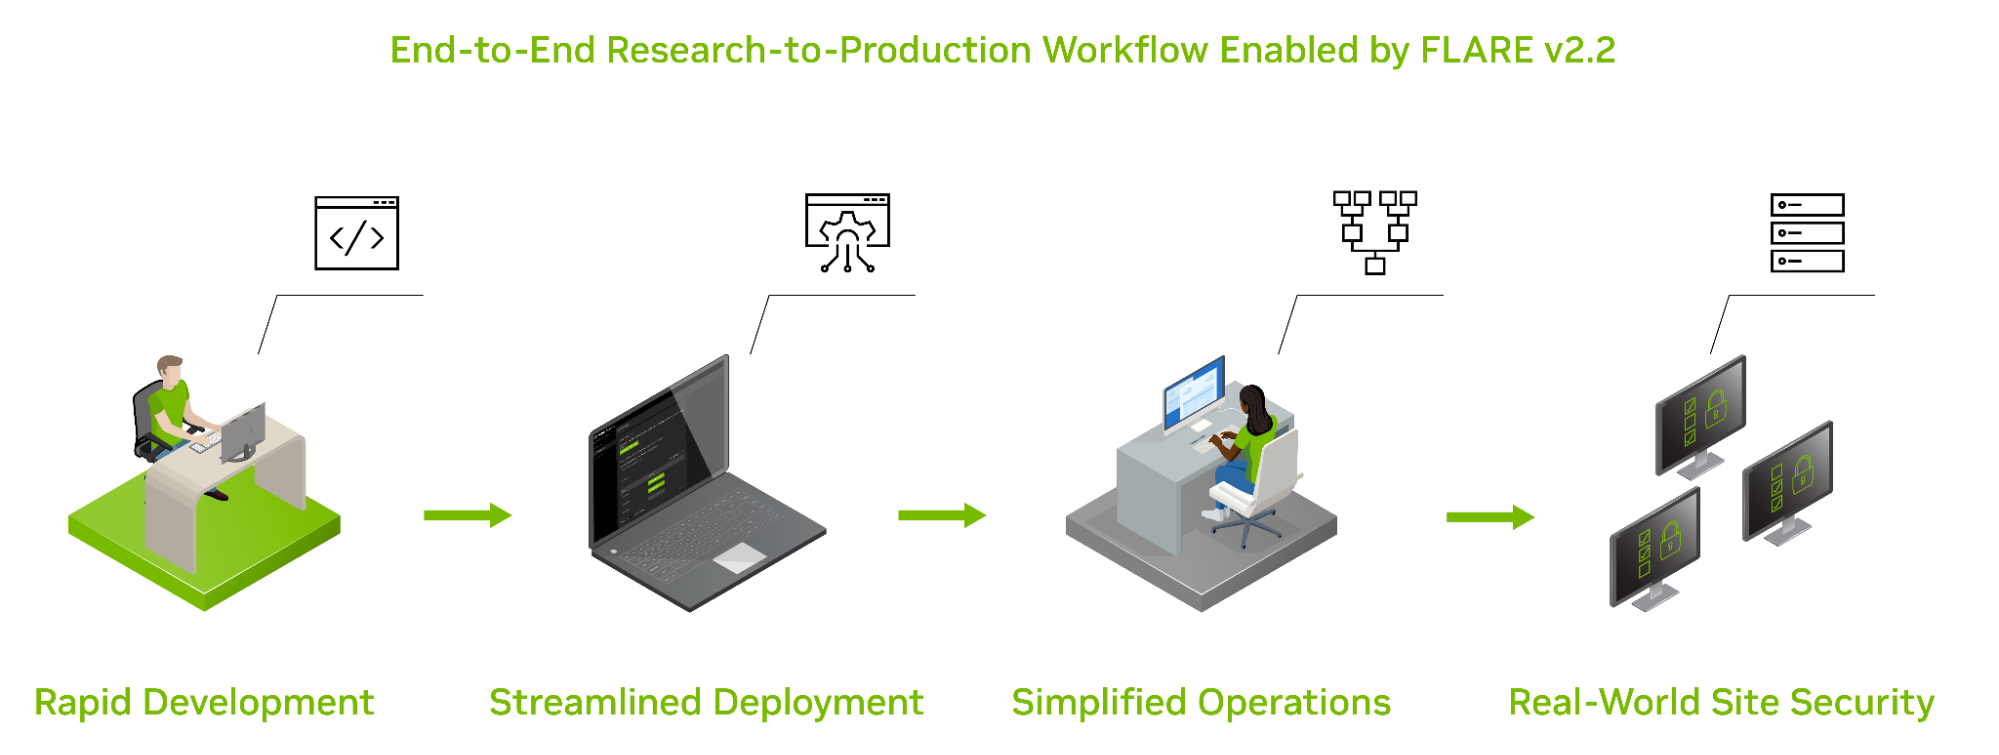 Diagram of the end-to-end NVIDIA FLARE 2.2 workflow showing the progression from application development using FL Simulator, deployment with the FLARE Dashboard, to simplified operations and security with the FLARE console and site security policies.